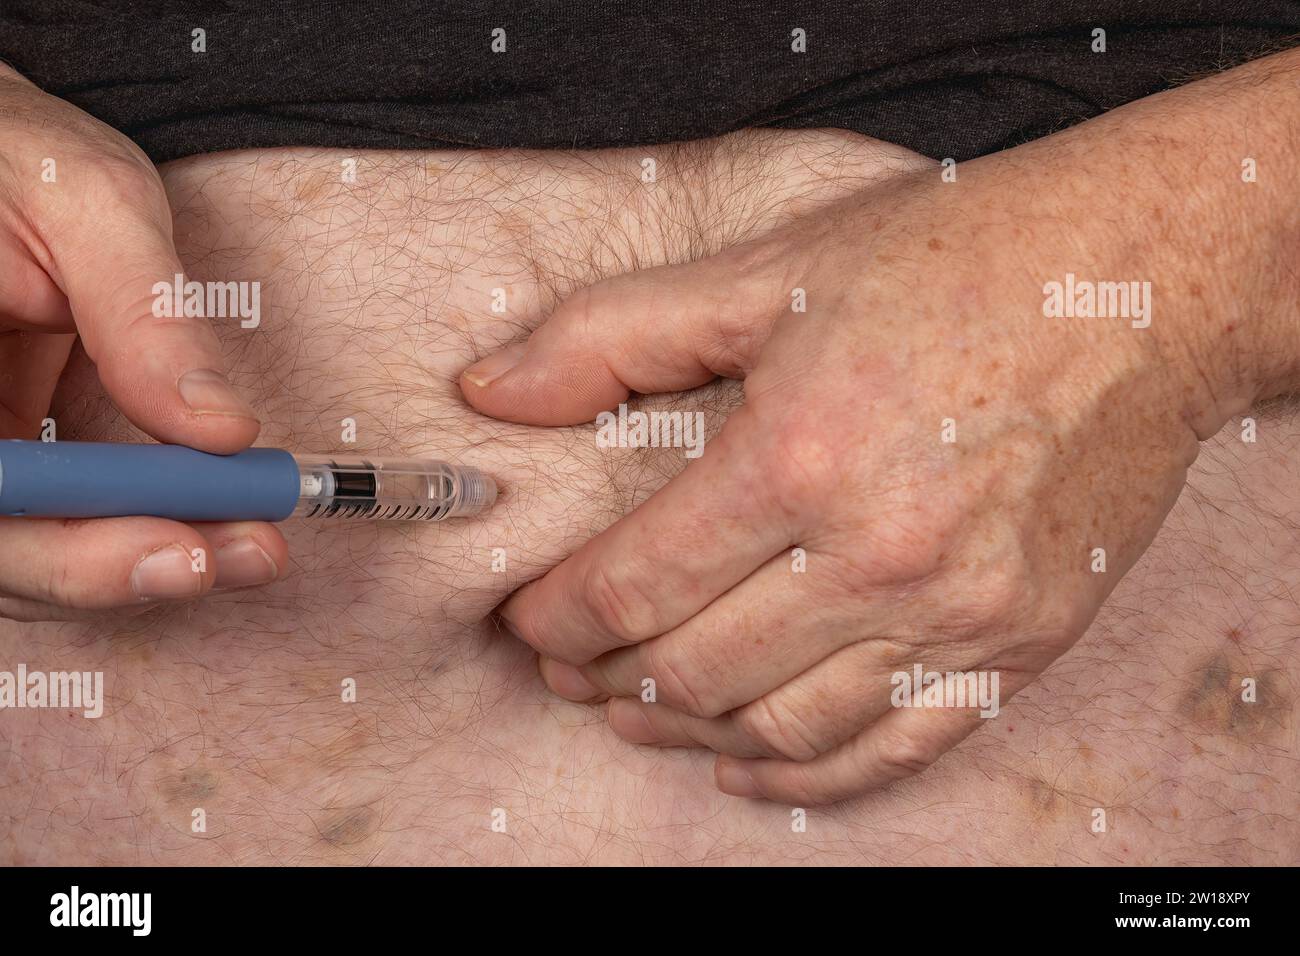 Diabetes Management: Injecting Insulin into Belly with Insulin Pen Stock Photo